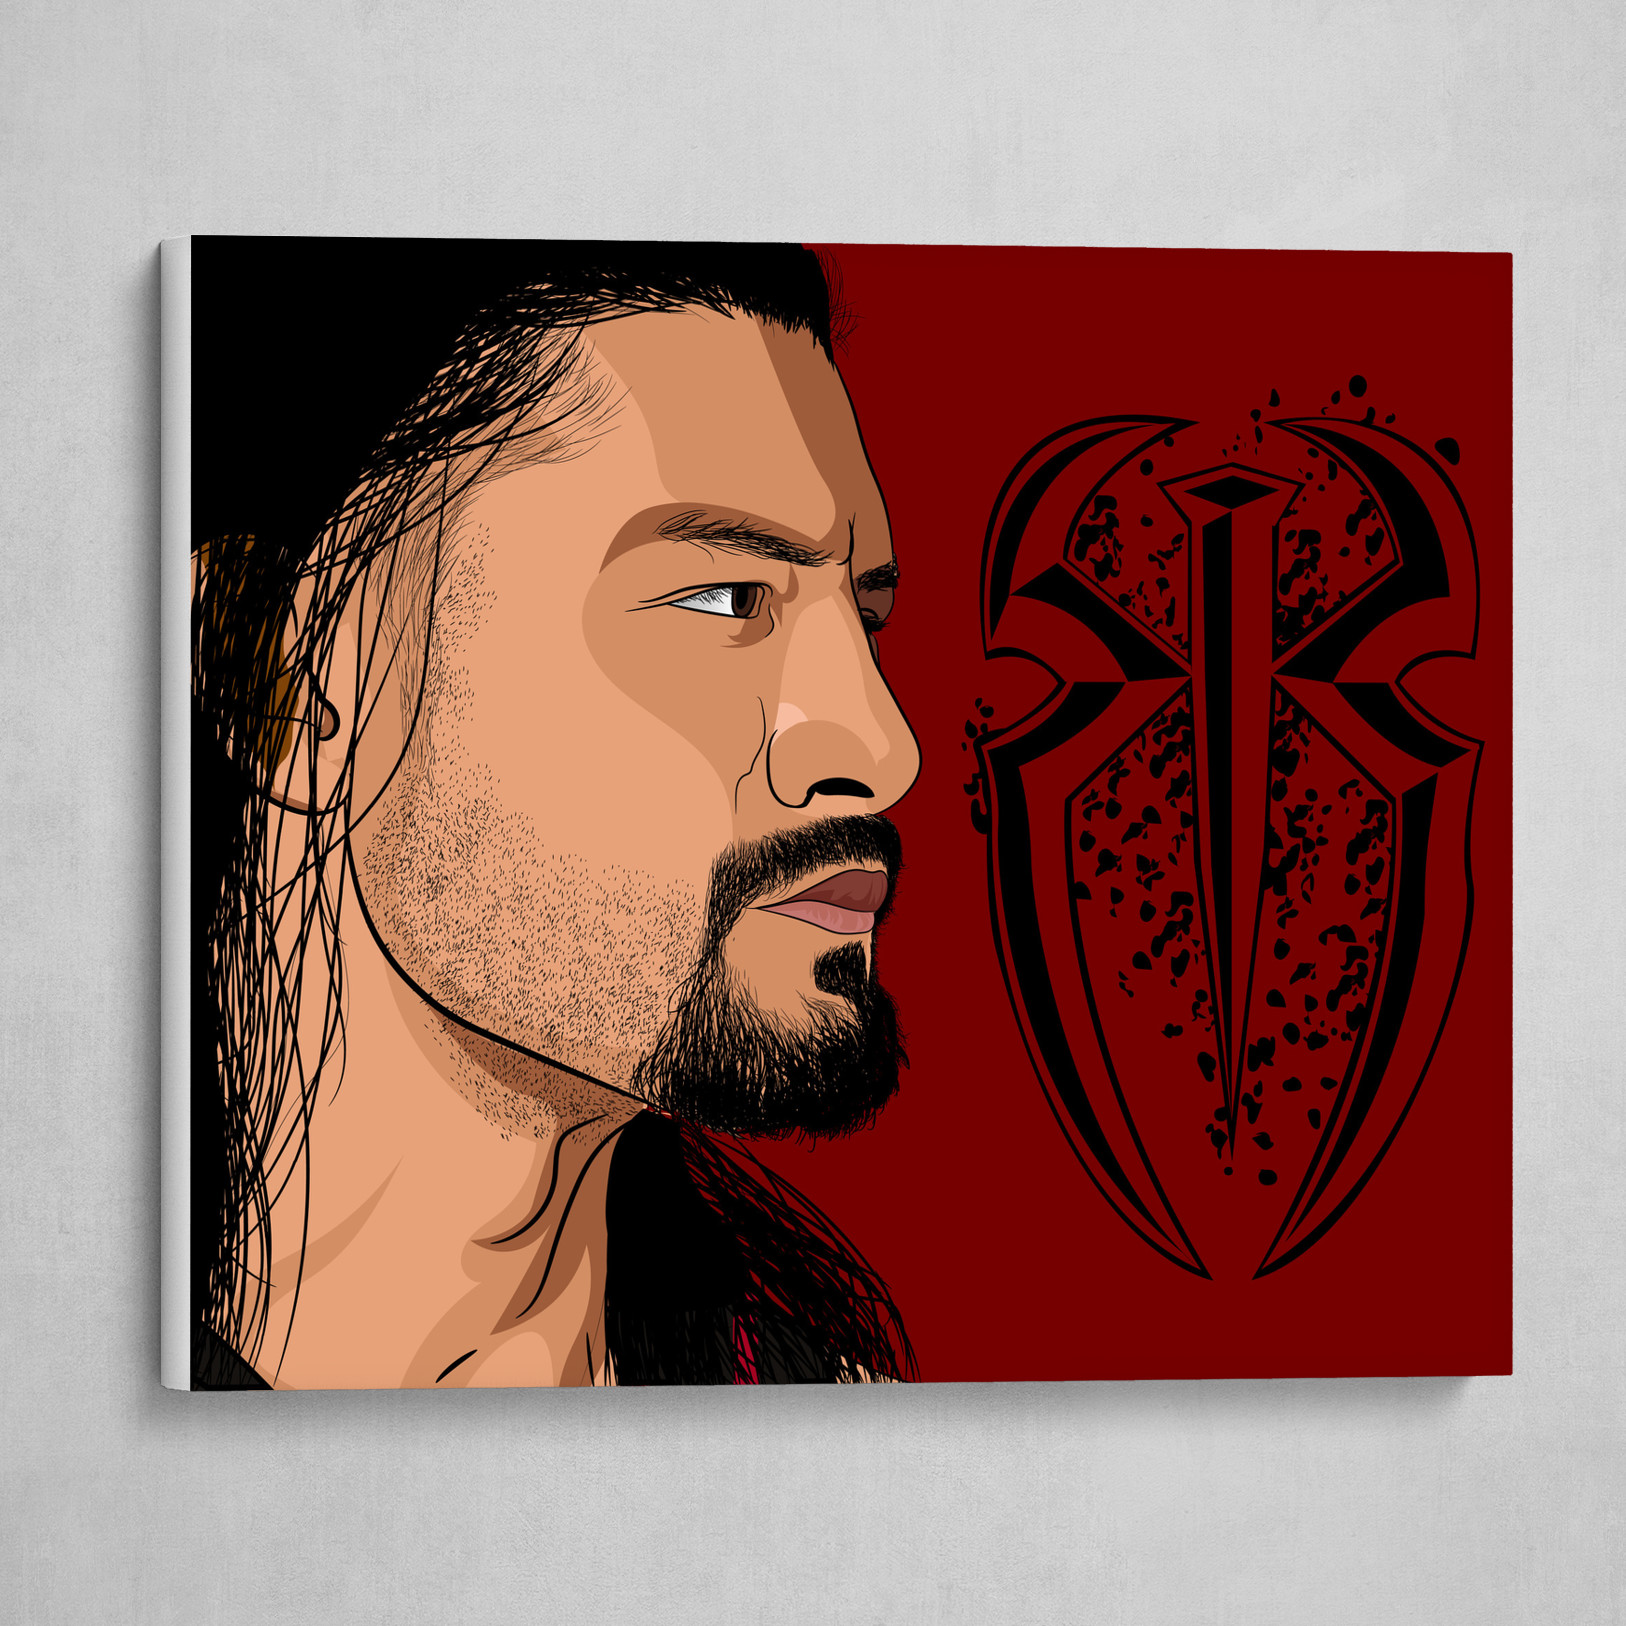 Roman Reigns - Tribal Chief - Artist AJ Moore by GudFit on DeviantArt